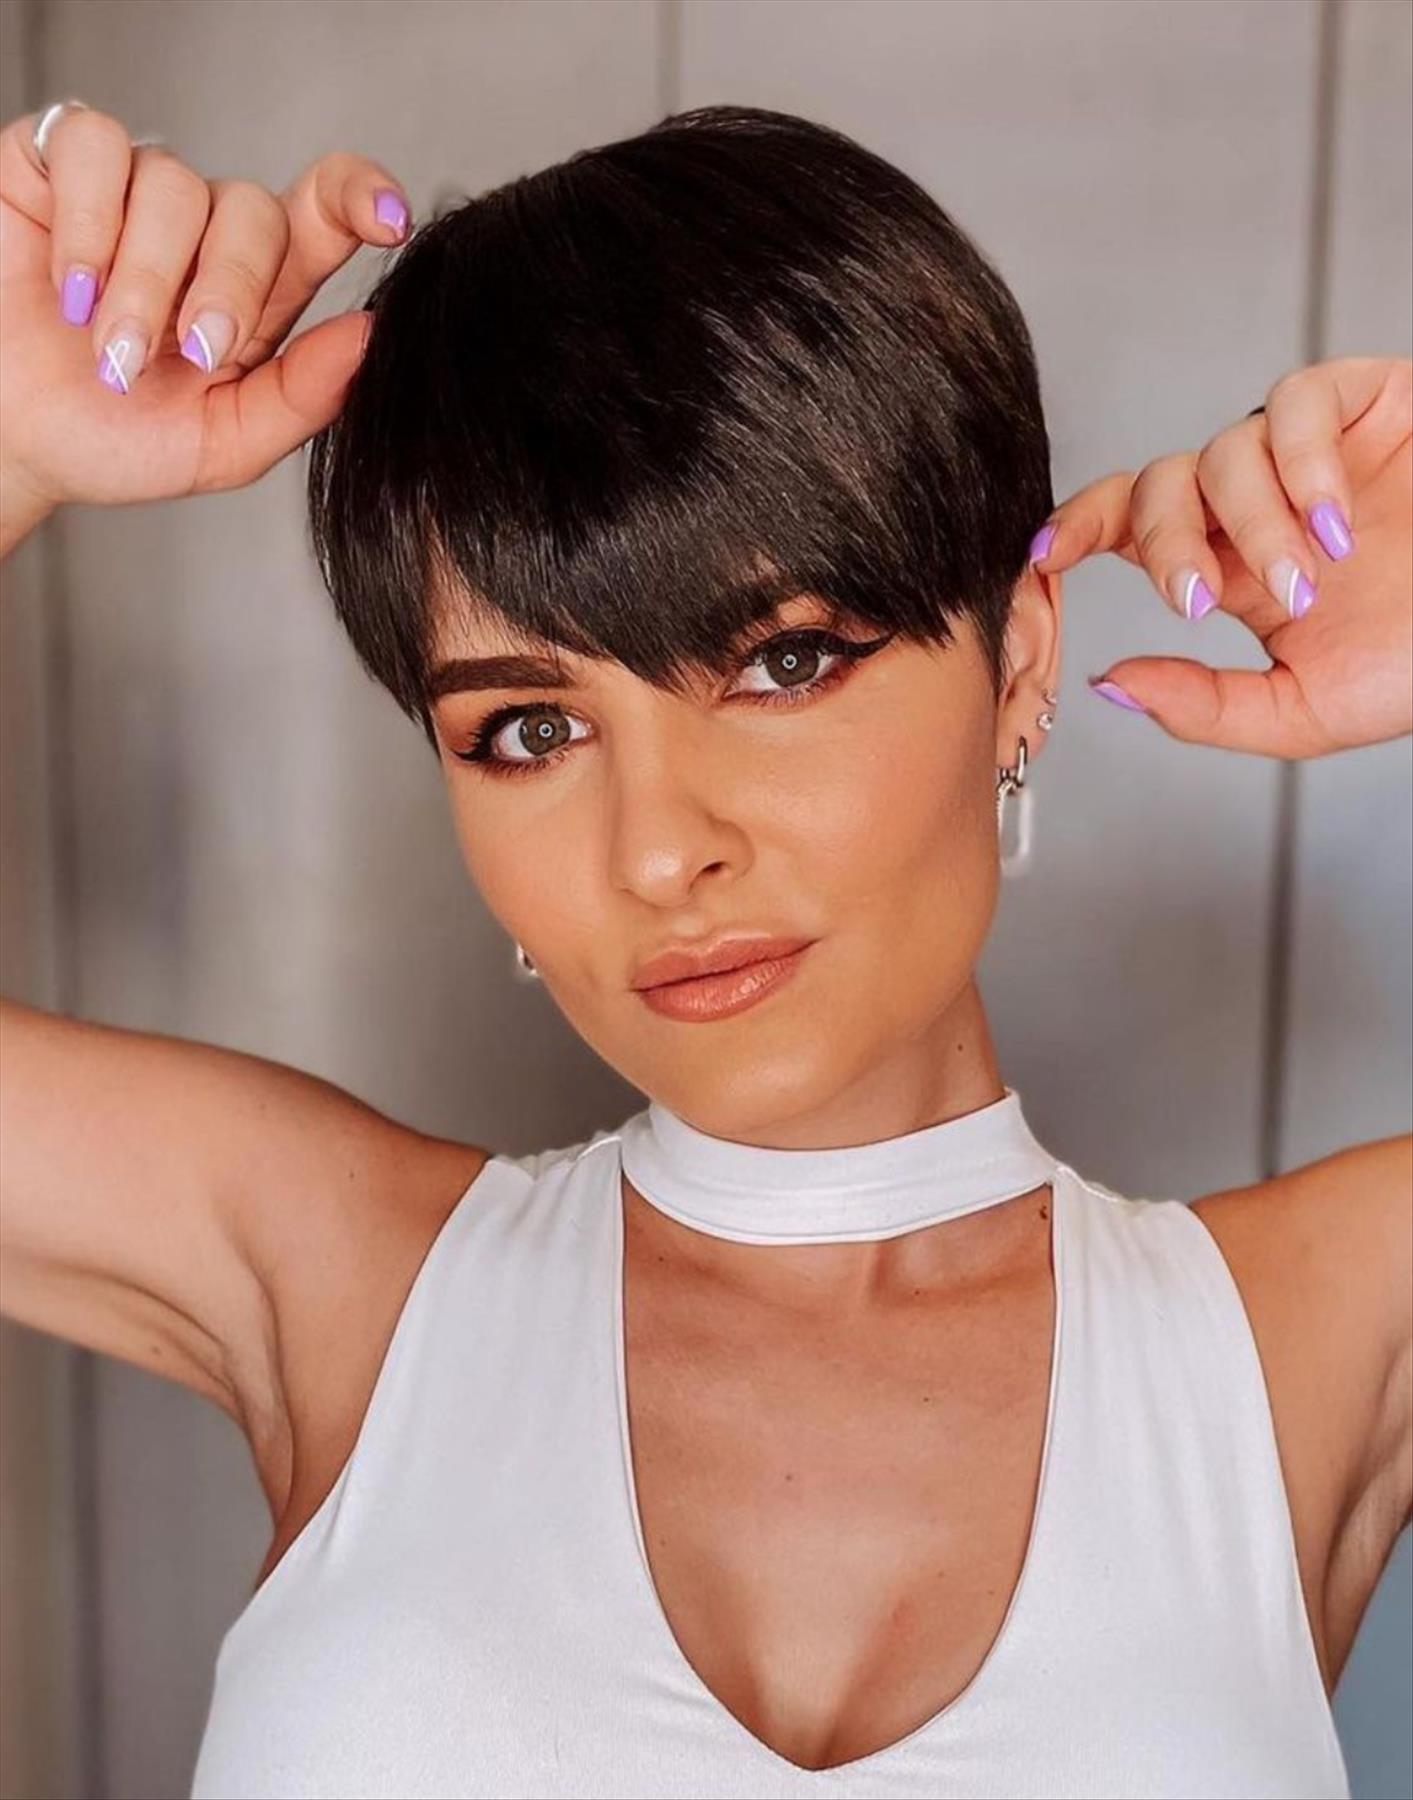 Best short hairstyle designs with pixie cuts and bob haircuts